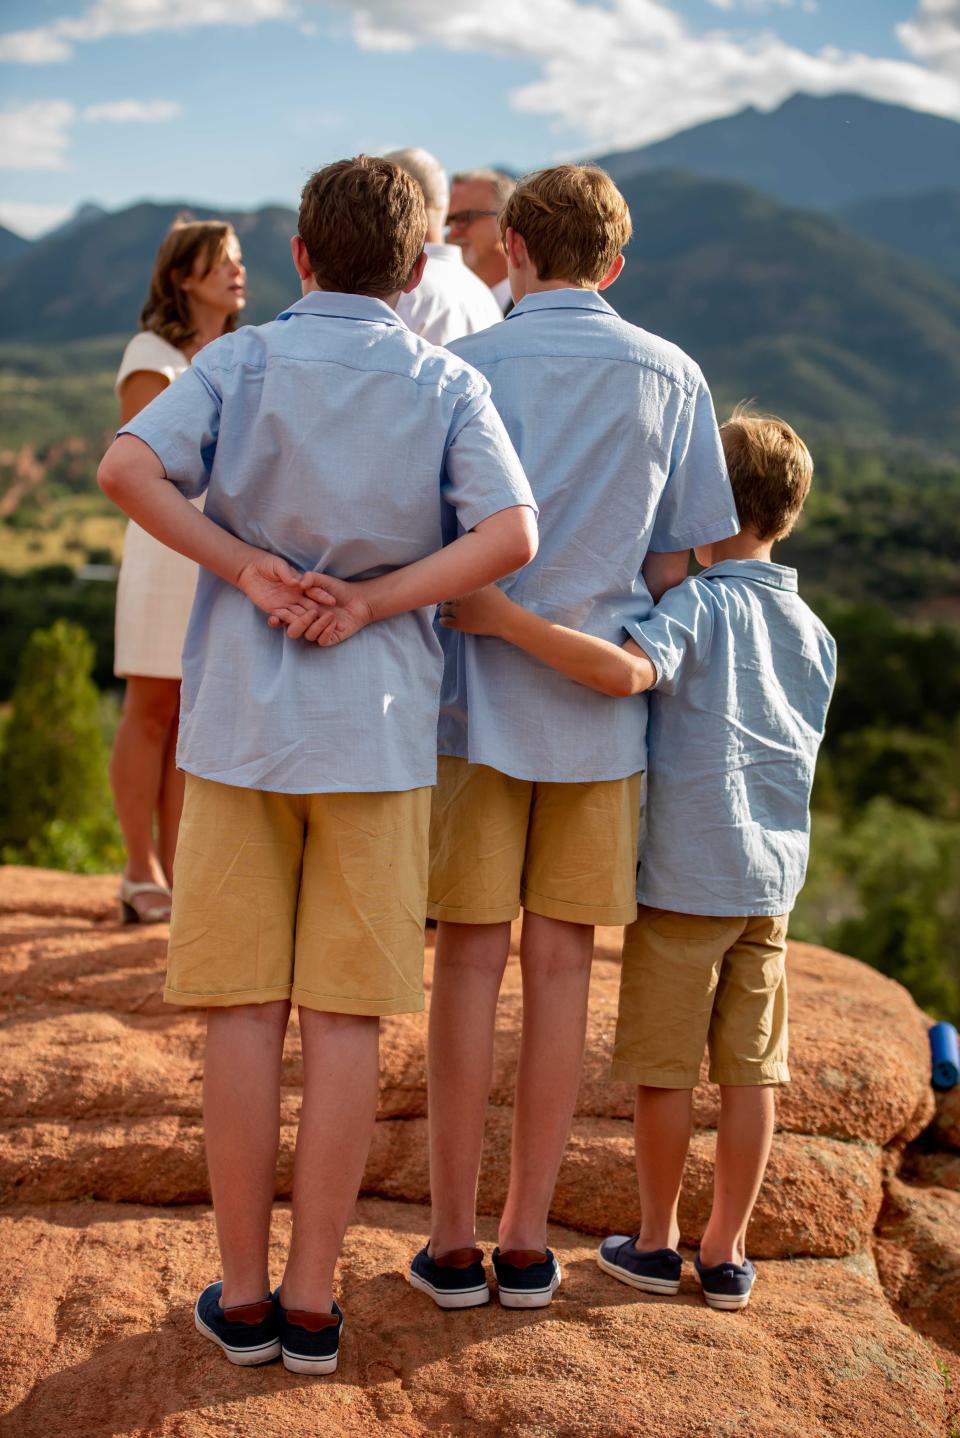 Three sons watch their mother and father get married with mountains in the background.